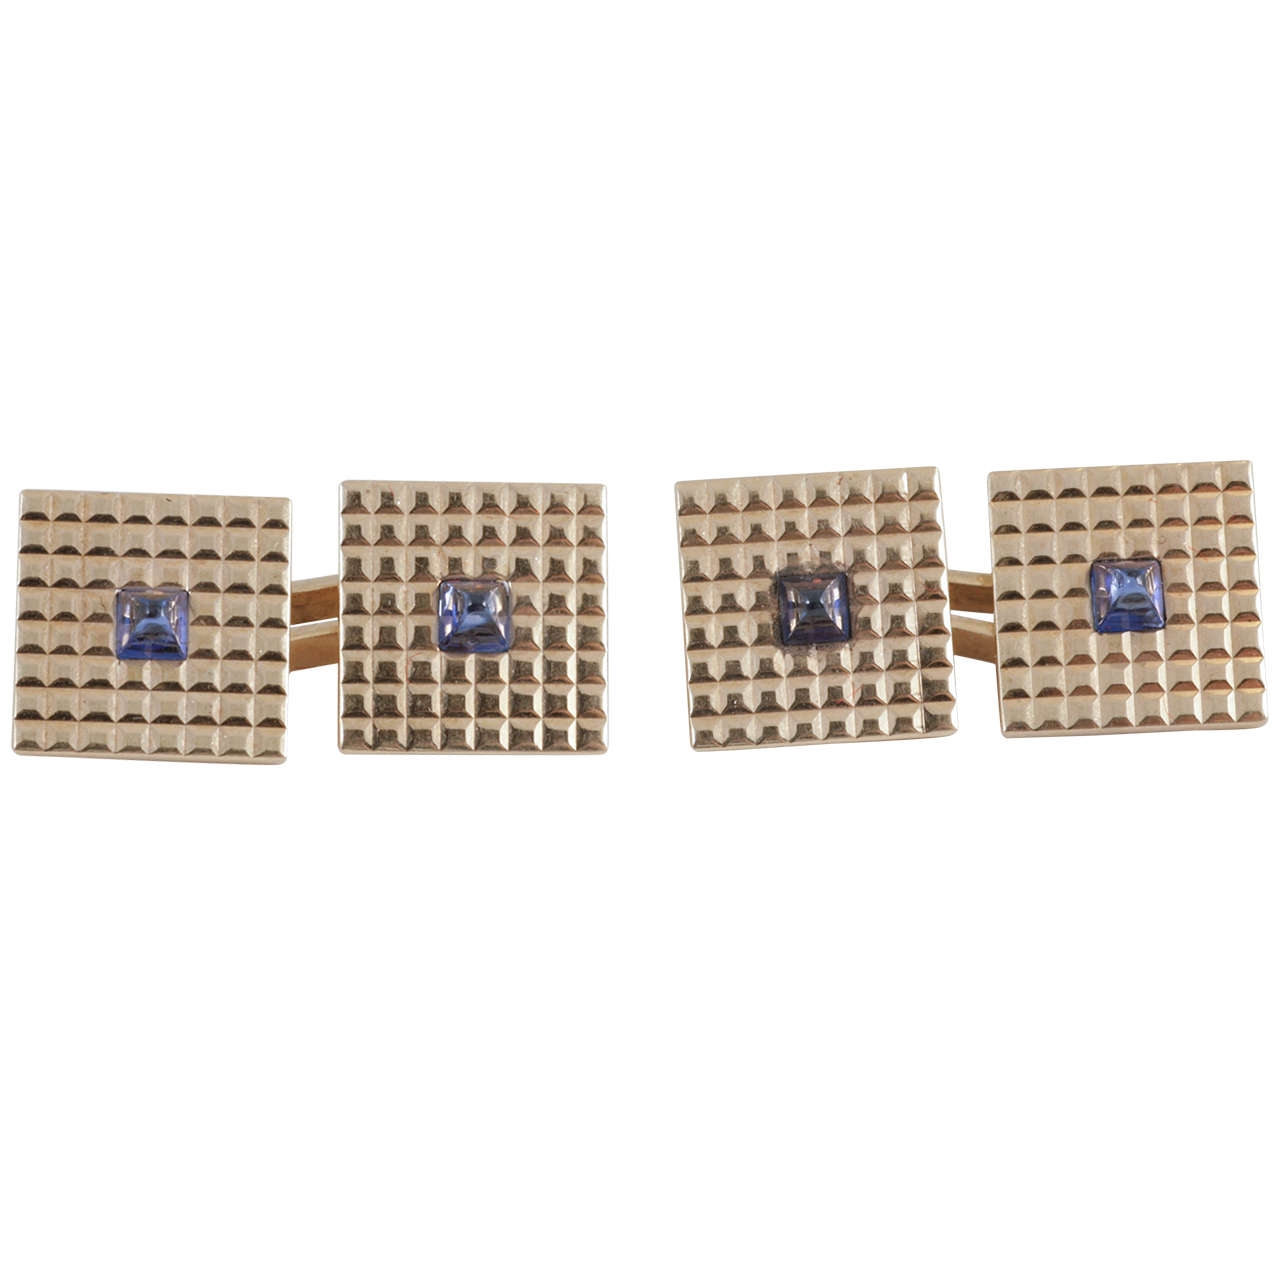 Pair Of French Gold Cufflinks With Attractive Cabochon Sapphire Centre